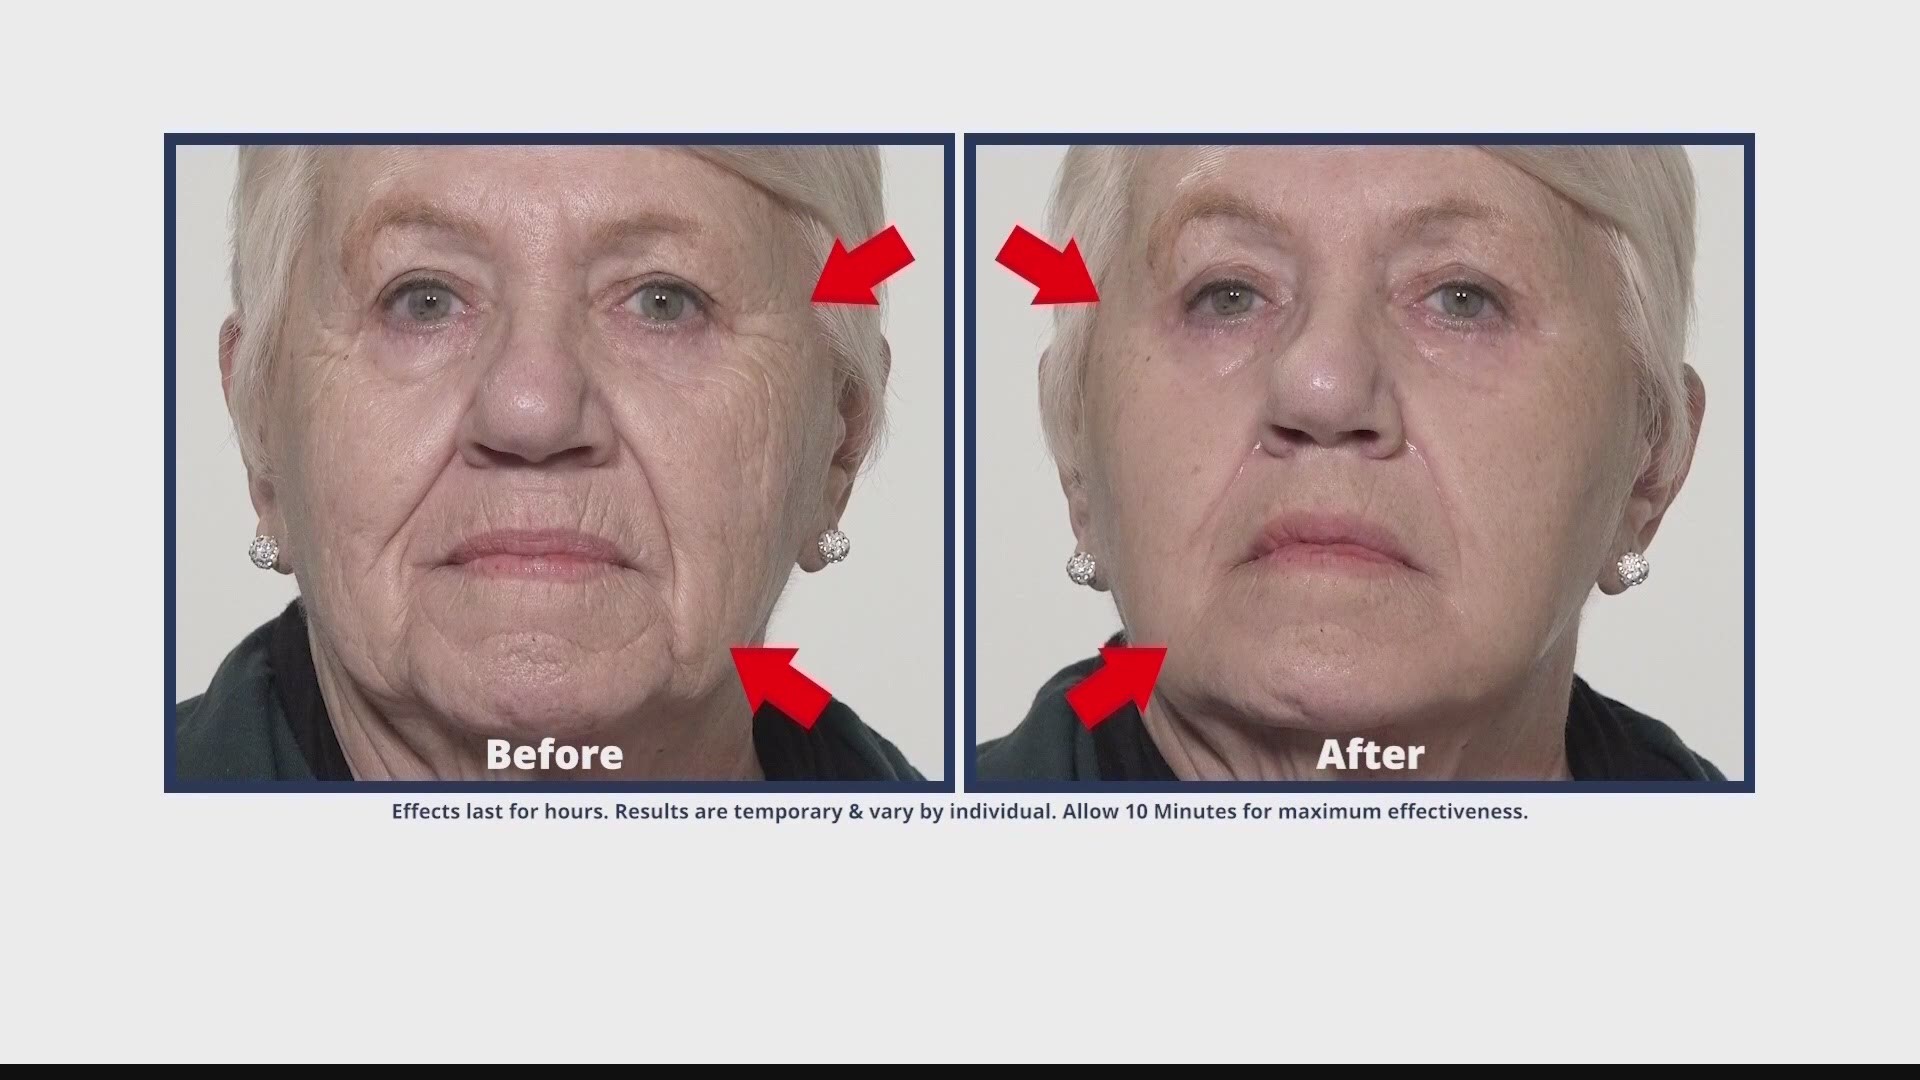 Plexaderm is a serum that can shrink your undereye bags and wrinkles!